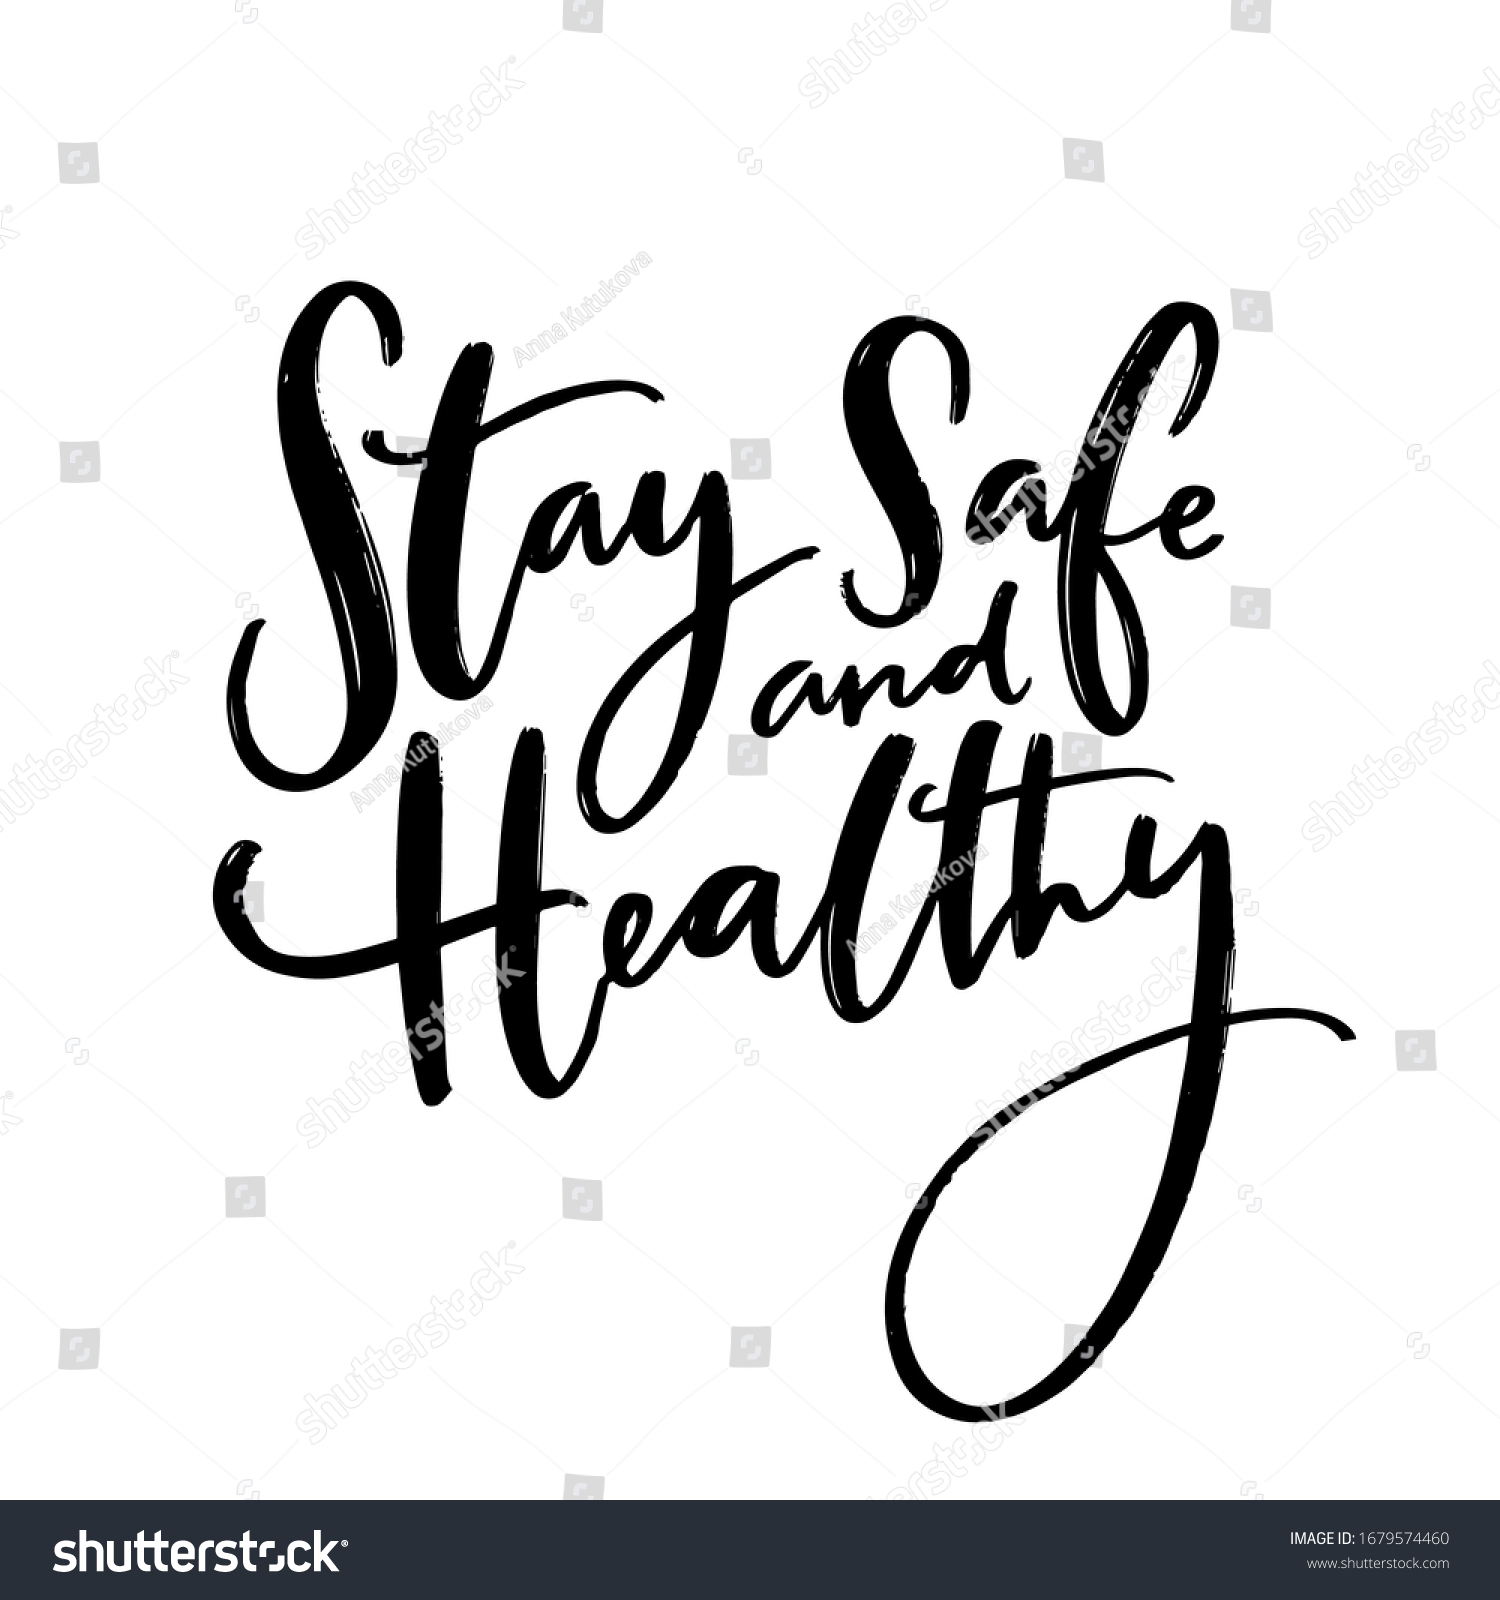 Stay safe and healthy. Handwritten wish of taking care. Support banner with inspirational message. Vector black quote. #1679574460